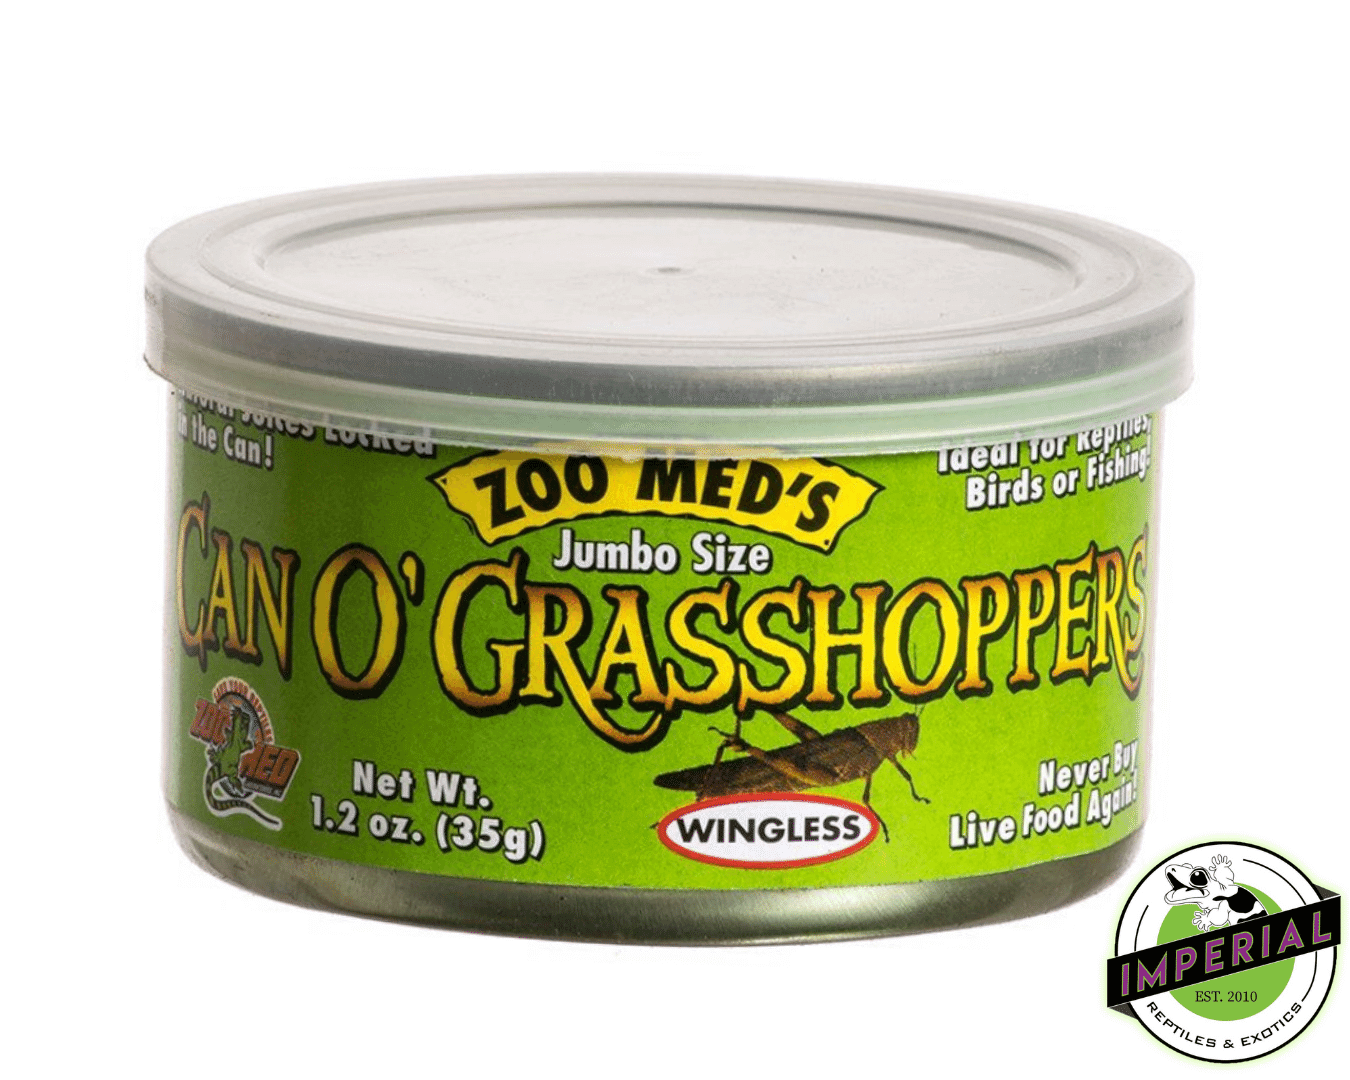 Buy canned grasshoppers for sale online at cheap prices. 